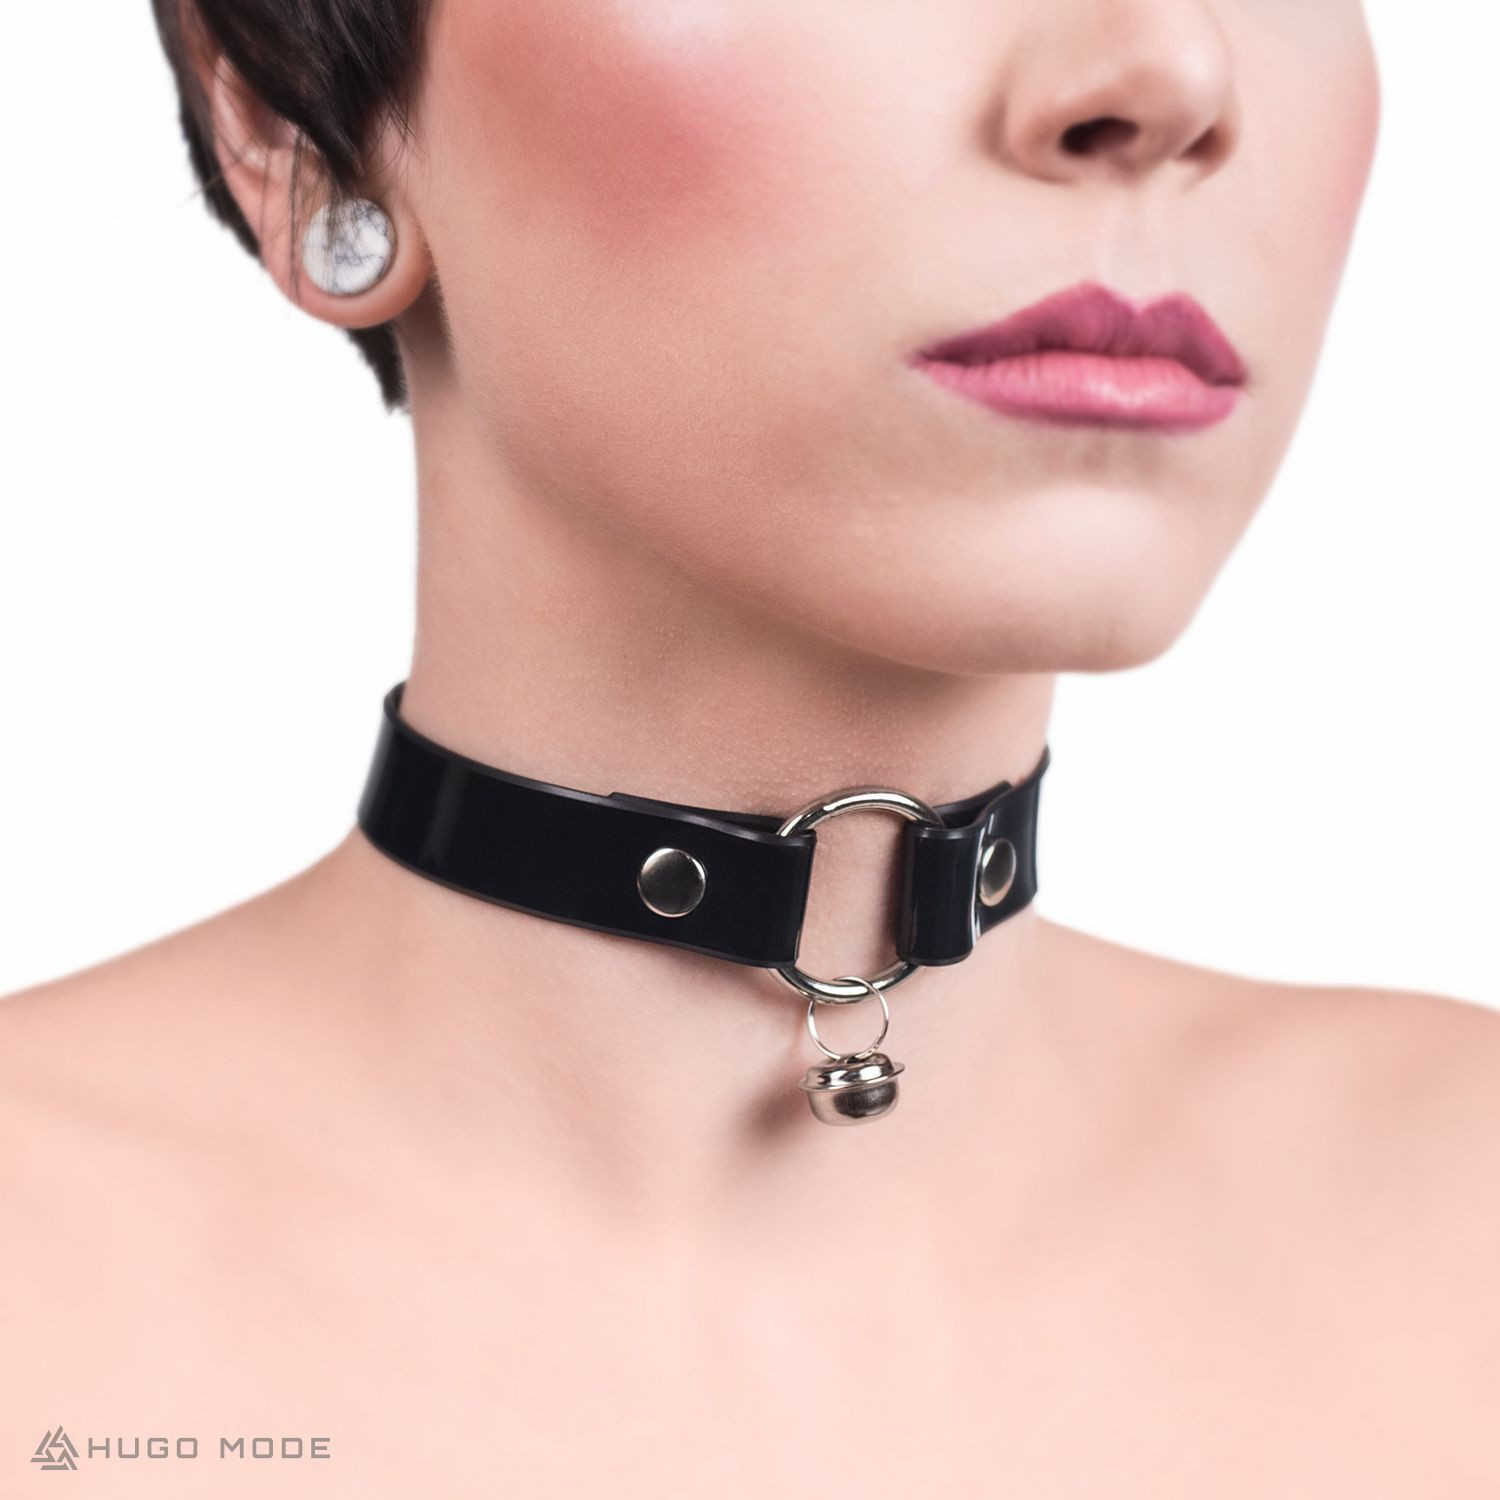 A neck choker connected with a ring with a jingle bell.